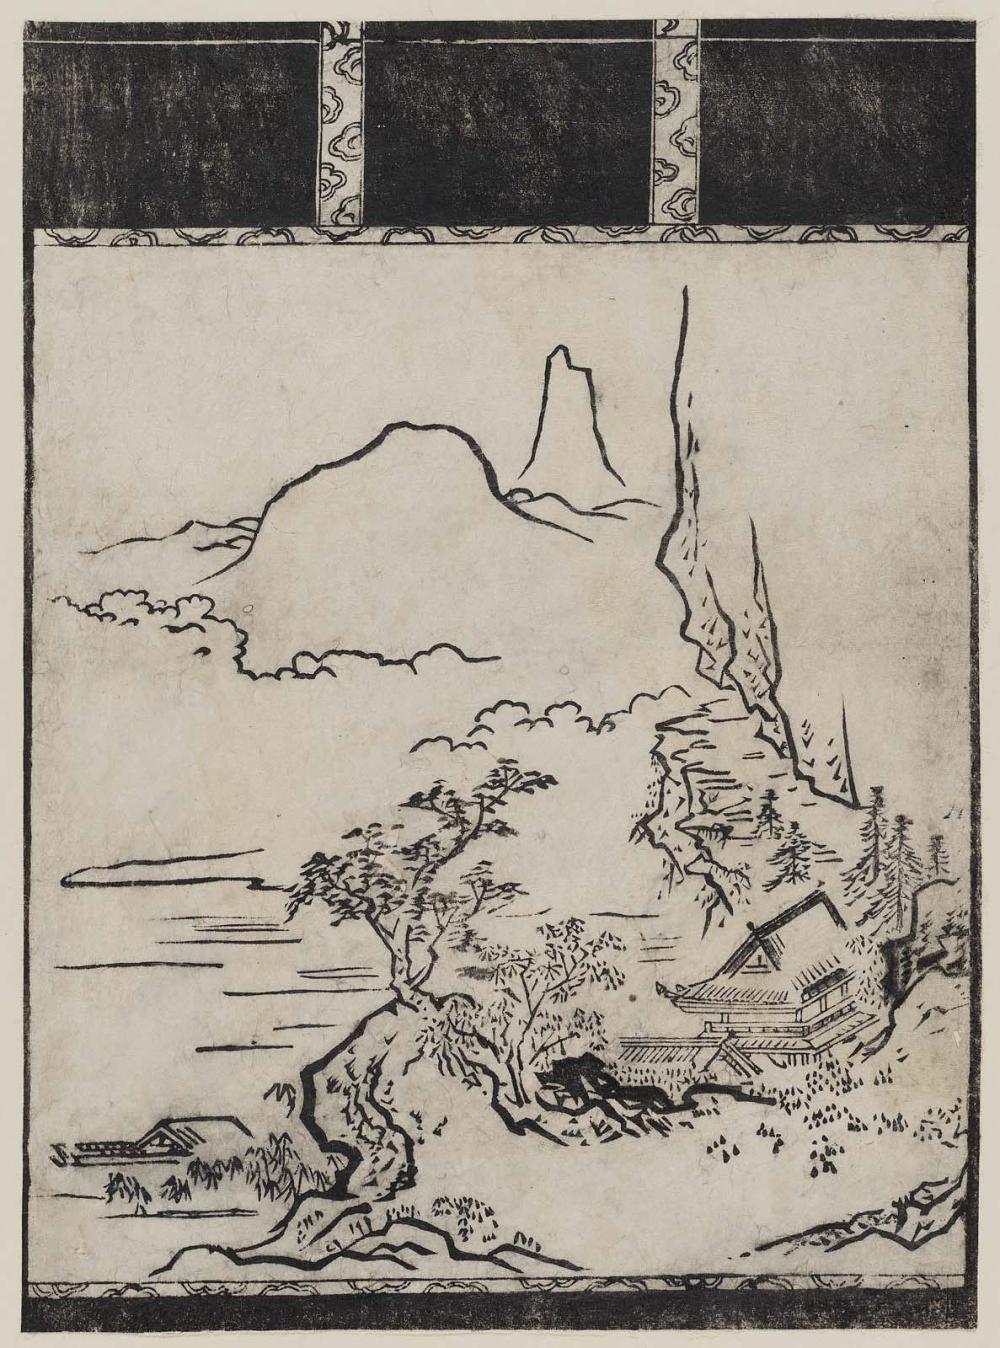 Chinese-style Landscape,.with Hanging Scroll Mounting, from an unidentified book